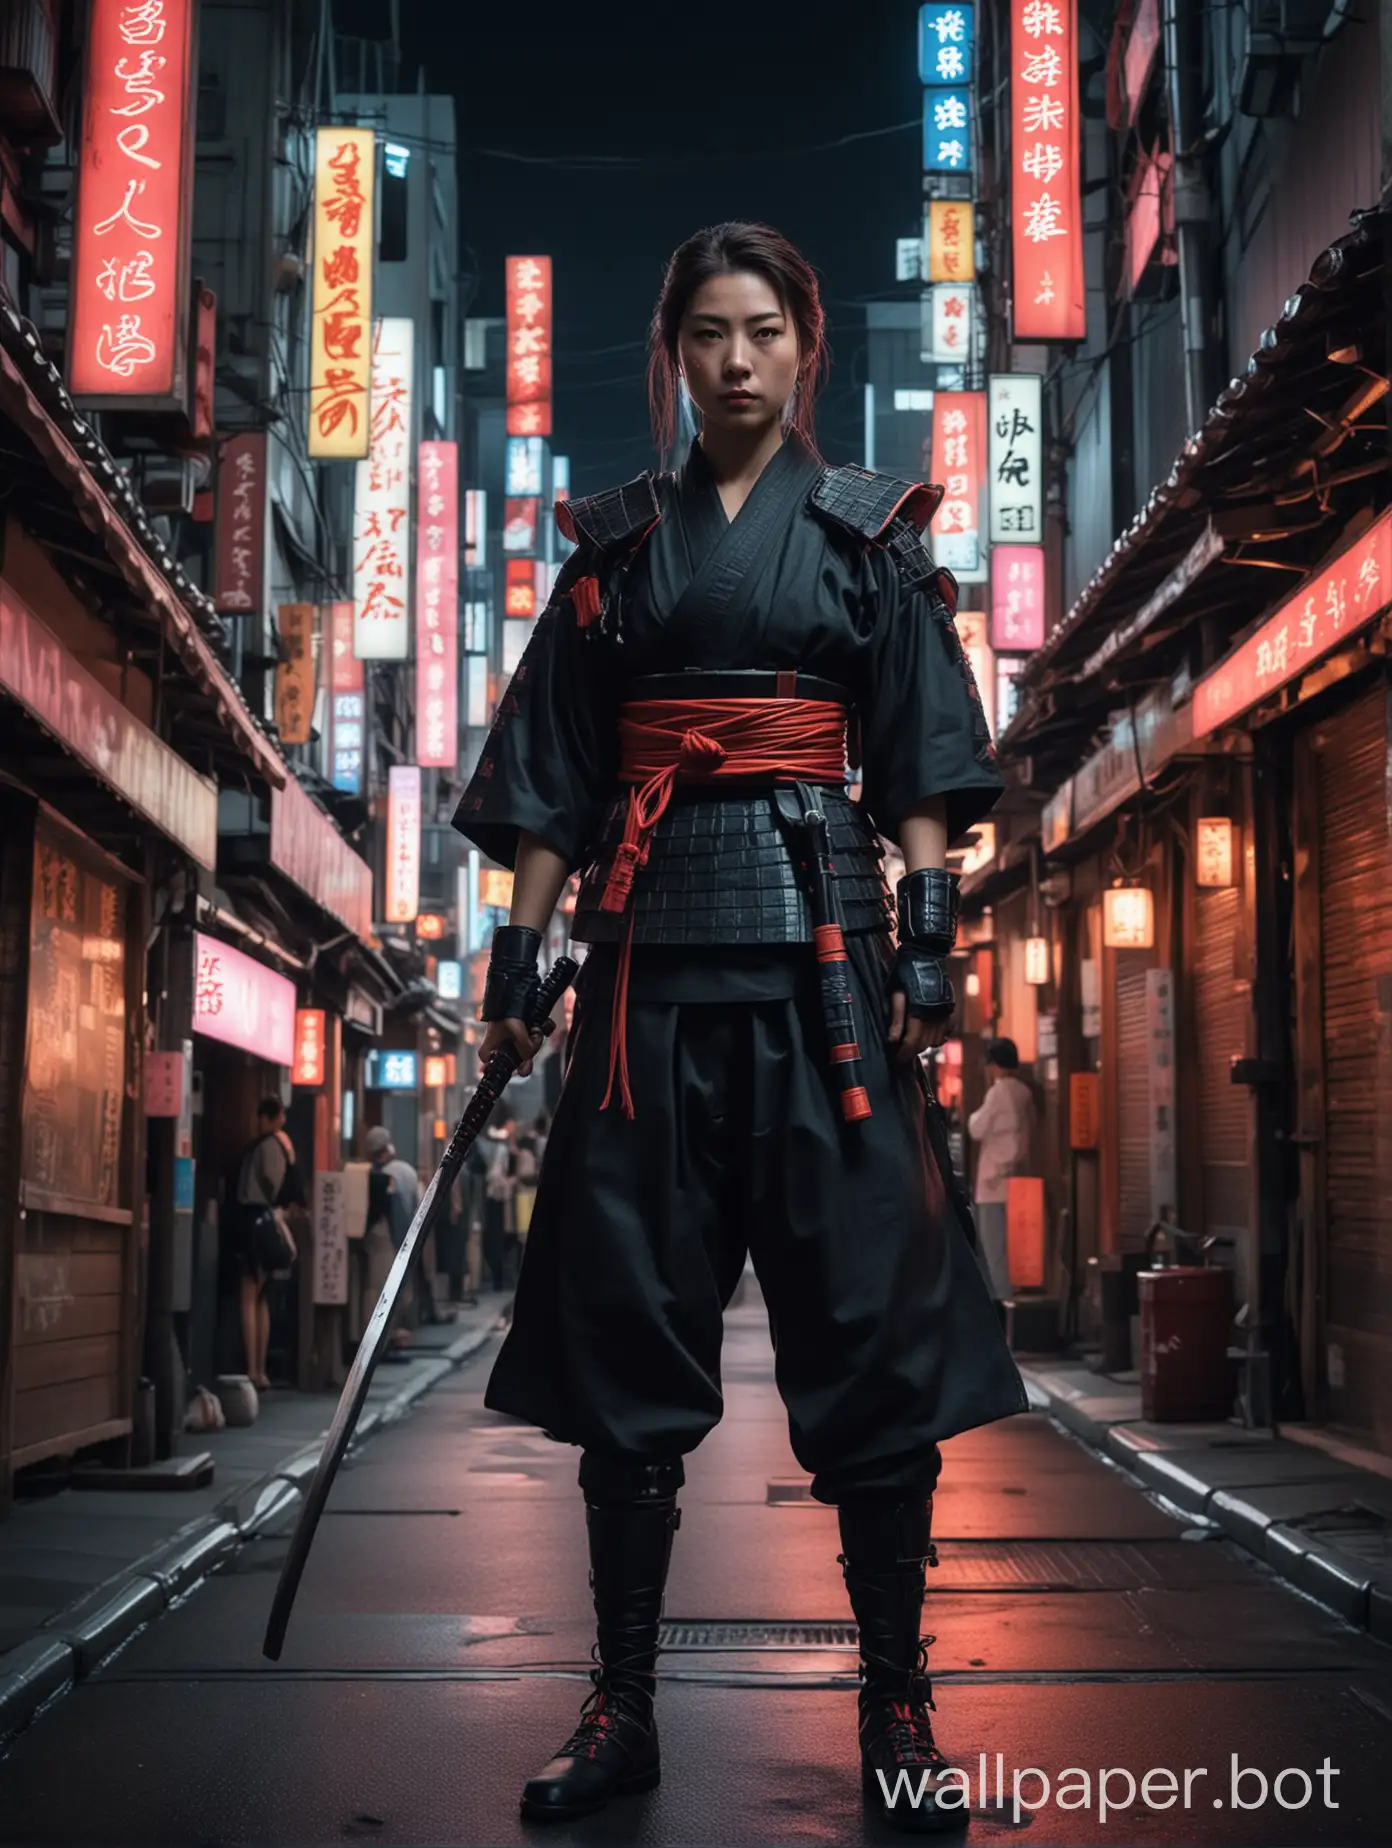 A female Samurai without armor and in the middle of a neon district in modern Japan